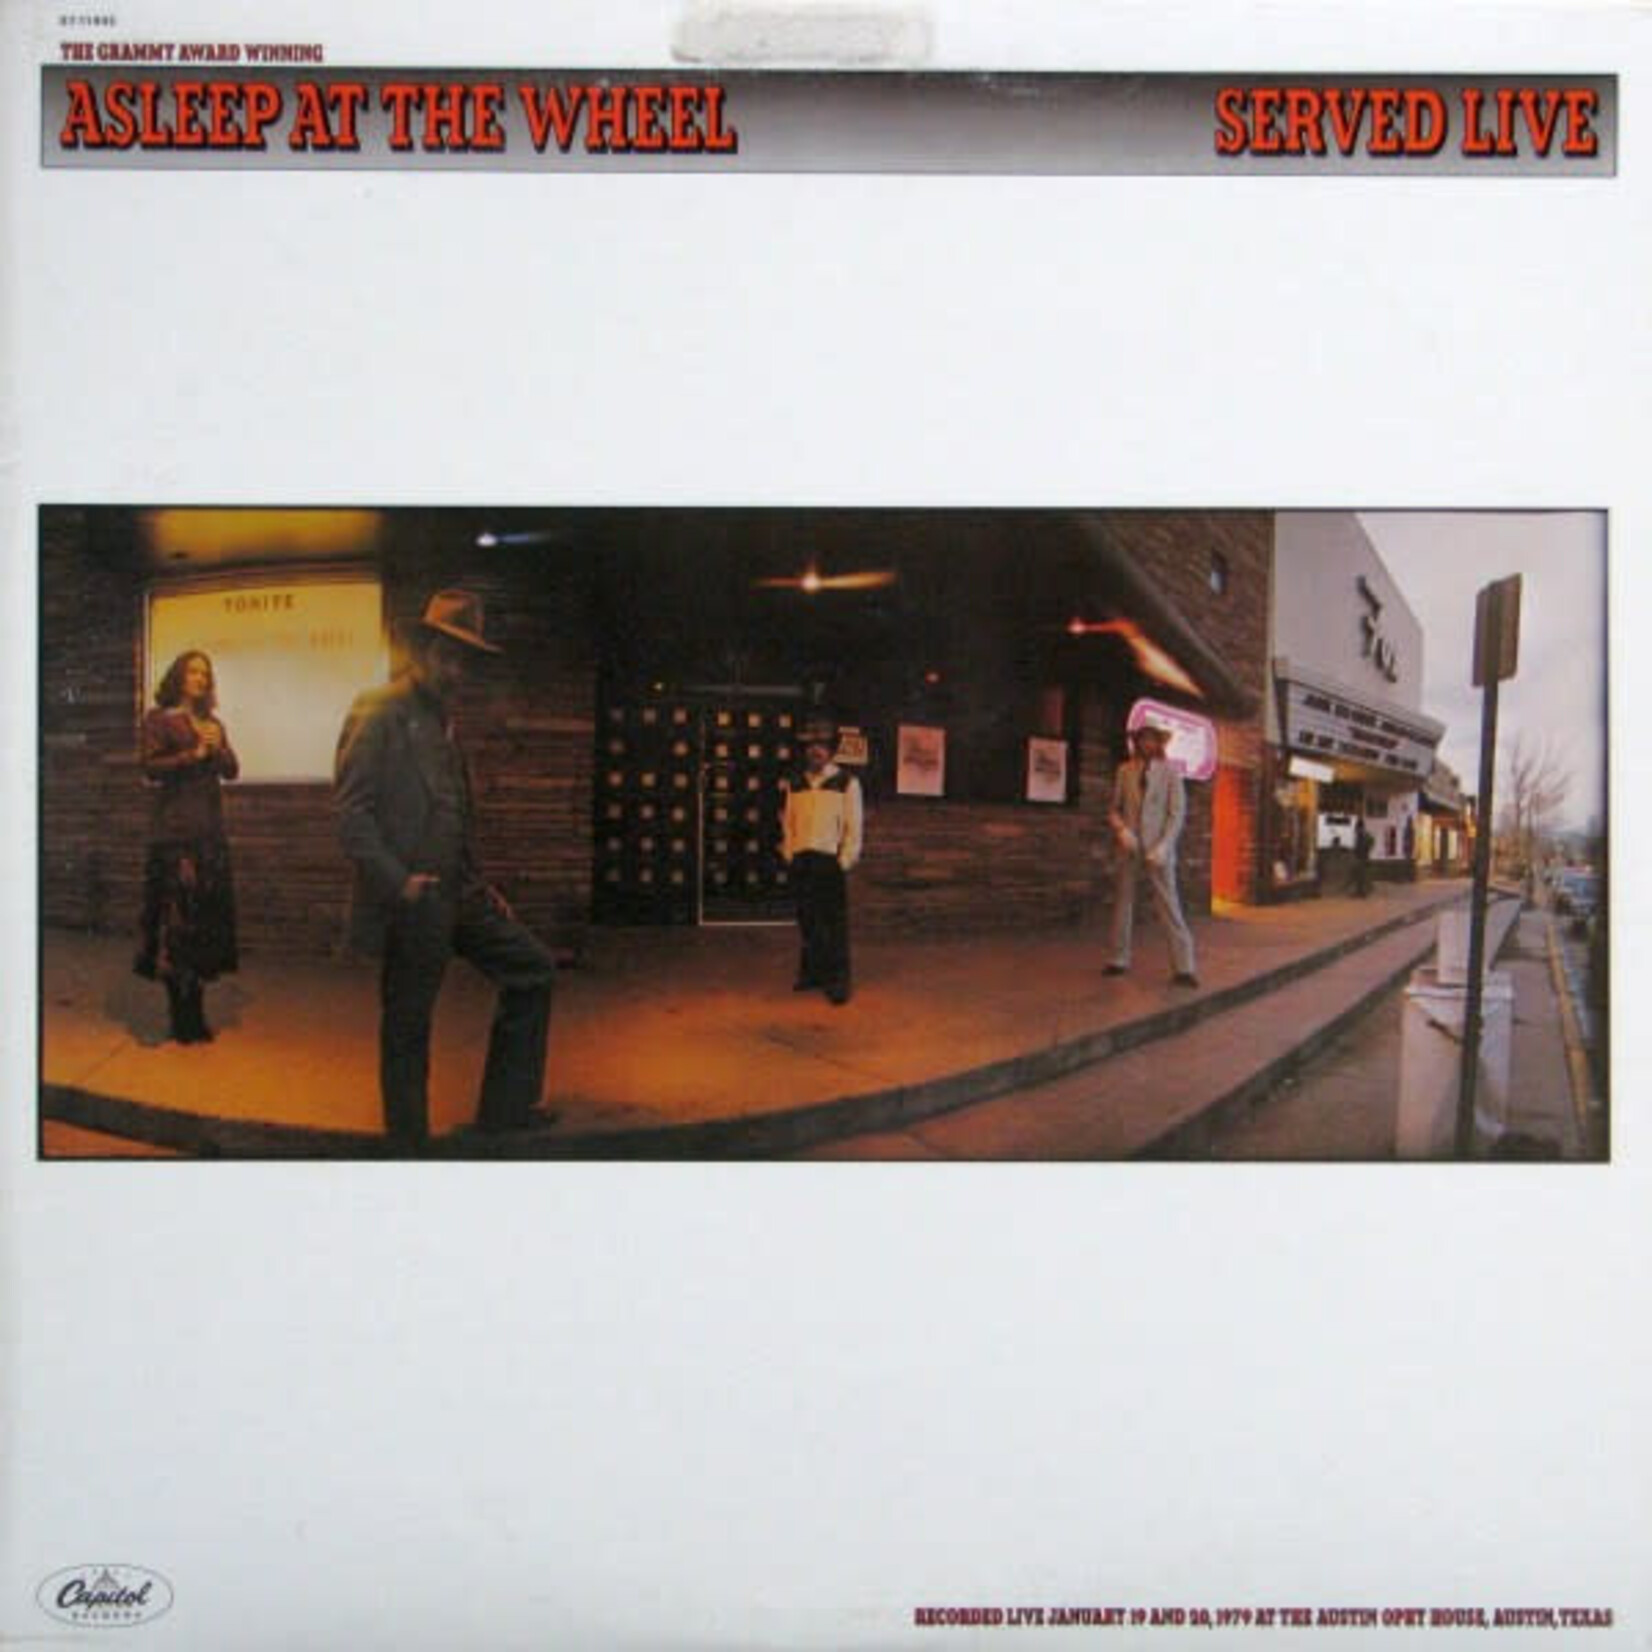 Asleep At The Wheel – Served Live (VG, 1979, LP, Capitol Records – ST-11945)